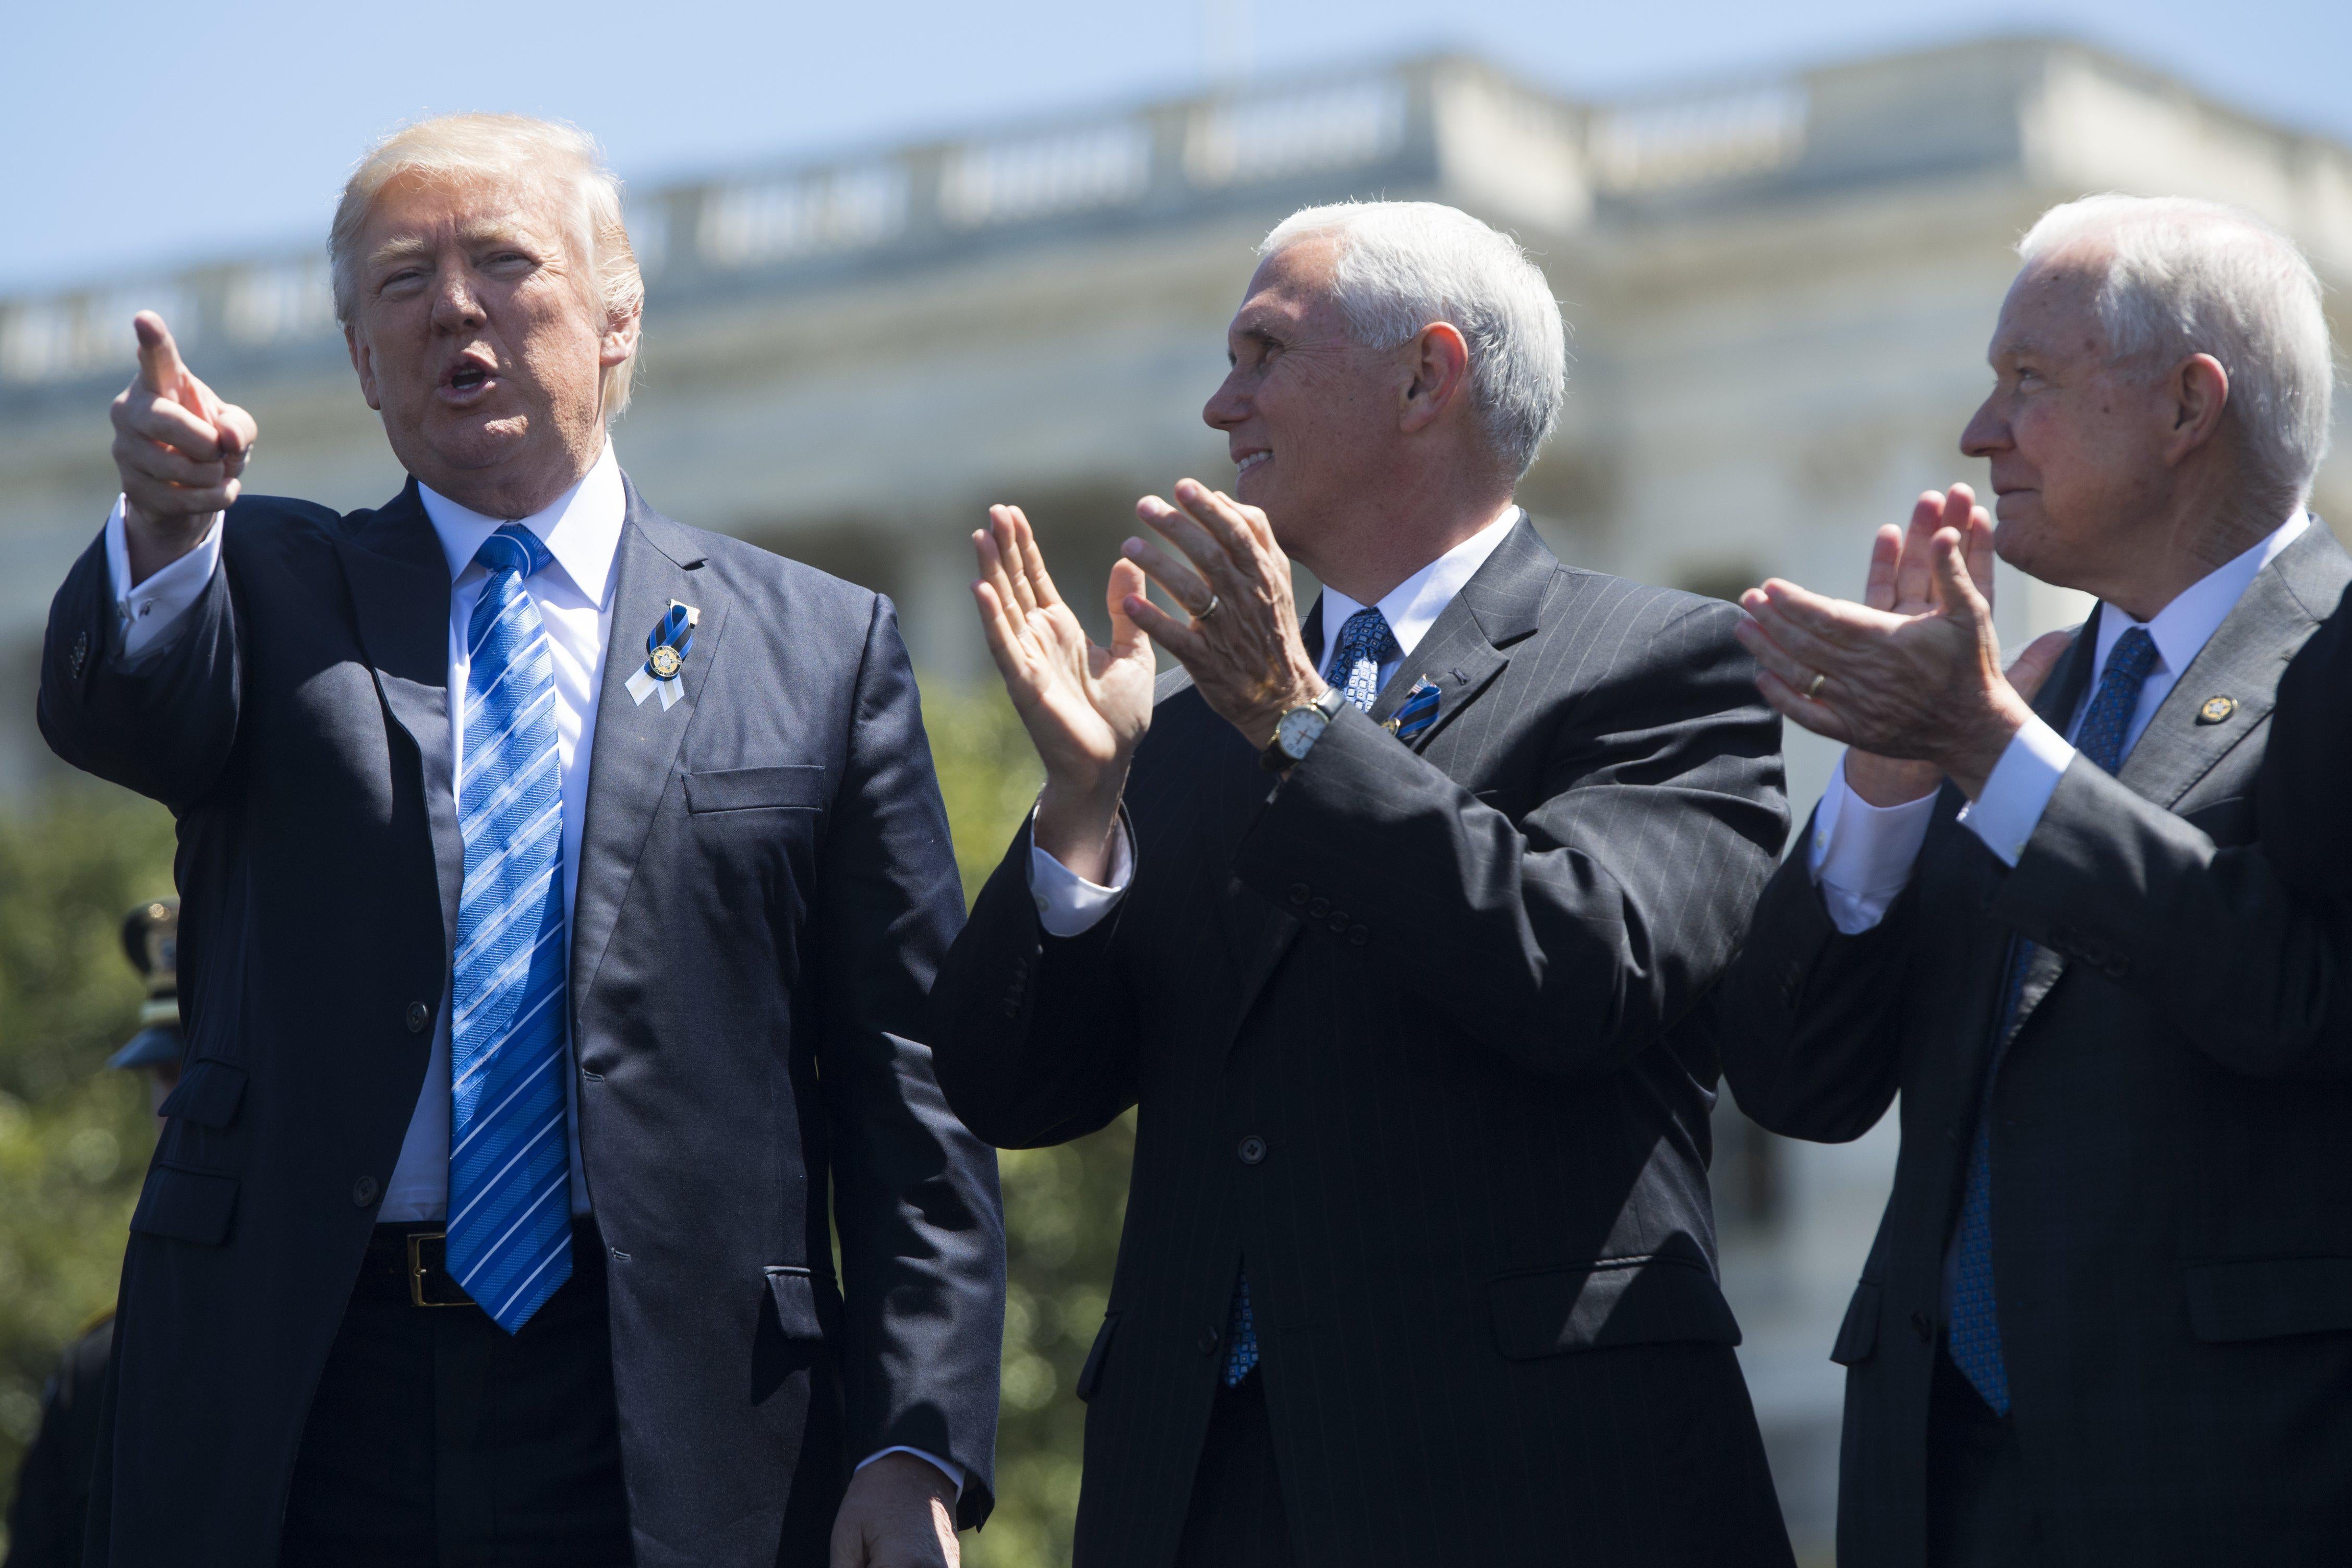 US President Donald Trump points alongside US Vice President Mike Pence (C) and Attorney General Jeff Sessions (R) during the 36th Annual National Peace Officers Memorial Service at the US Capitol in Washington, DC, May 15, 2017. / AFP PHOTO / SAUL LOEB        (Photo credit should read SAUL LOEB/AFP/Getty Images)